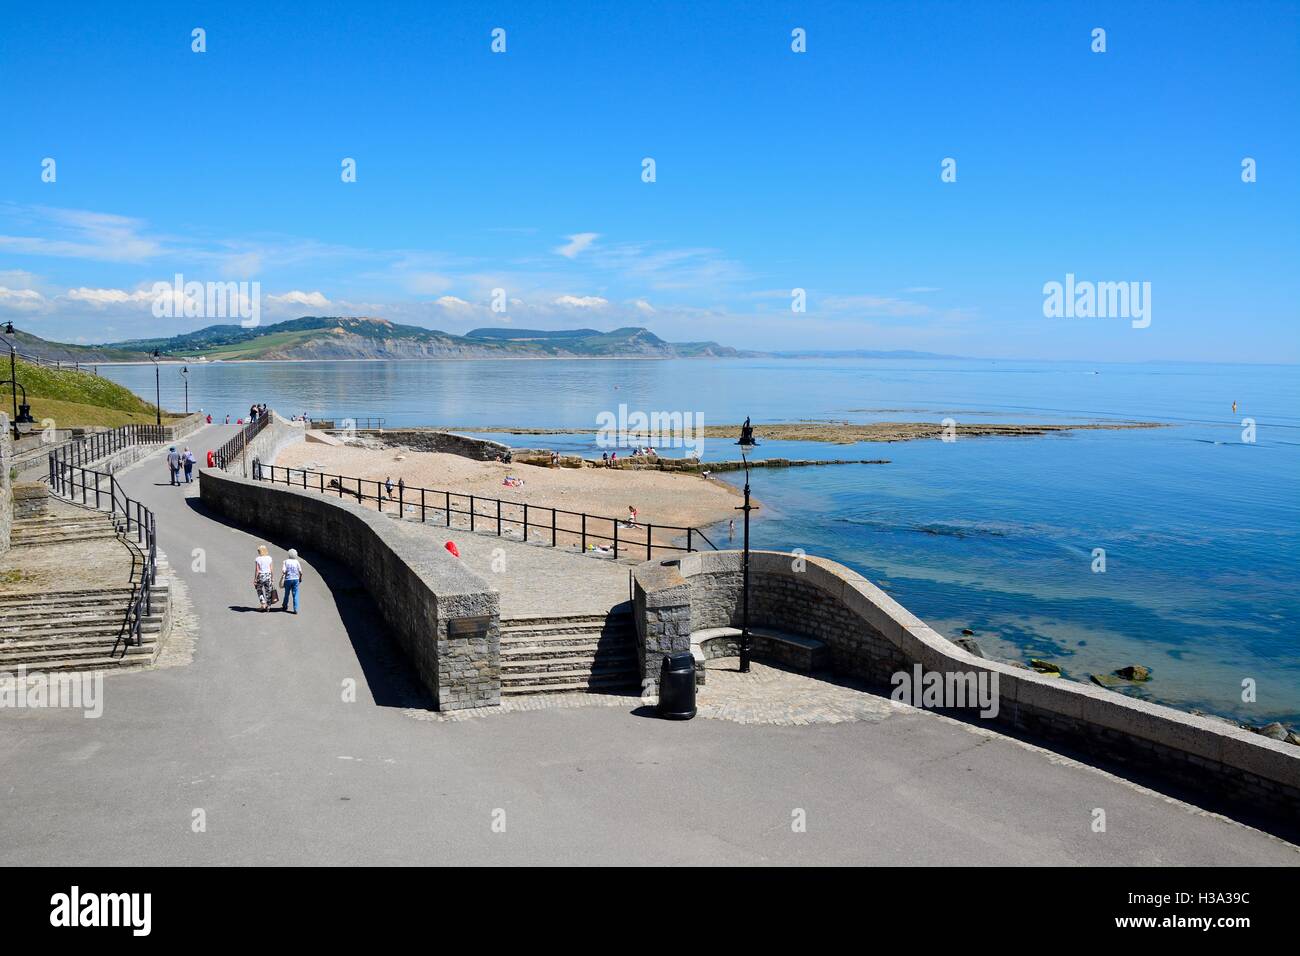 View along Gun Cliff Walk with the sea and coastline to the rear, Lyme Regis, Dorset, England, UK, Western Europe. Stock Photo